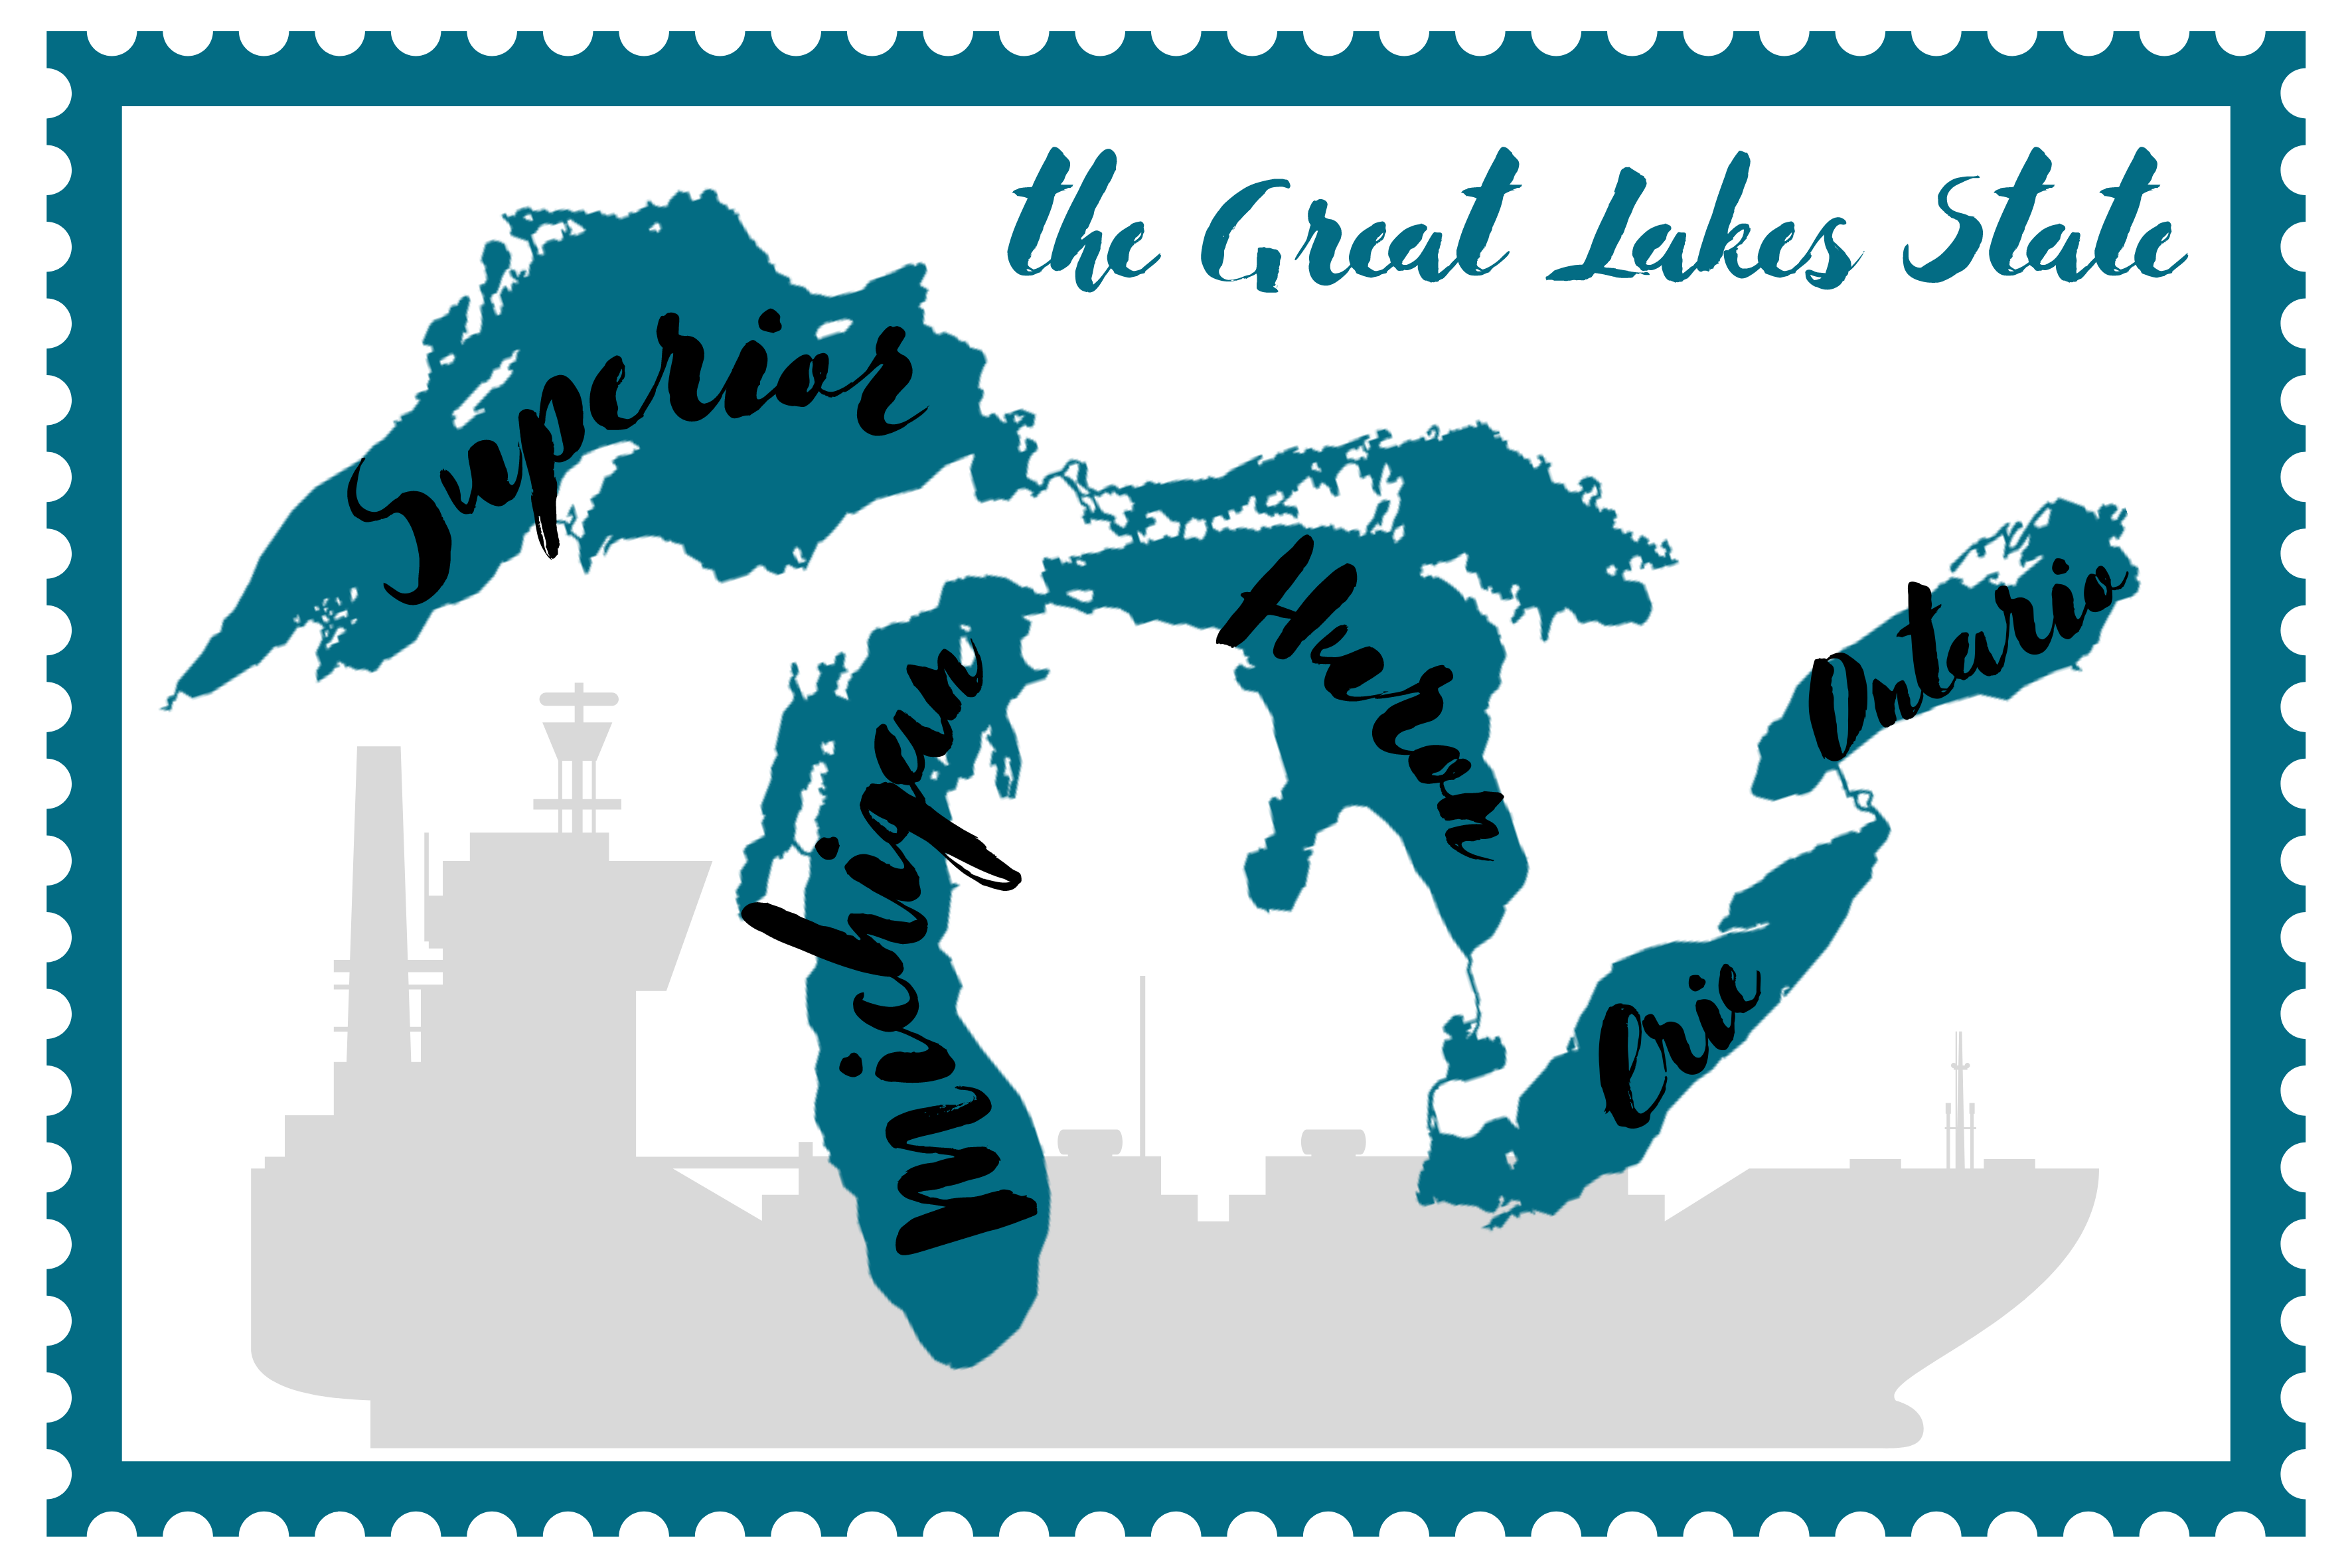 The Great Lakes State